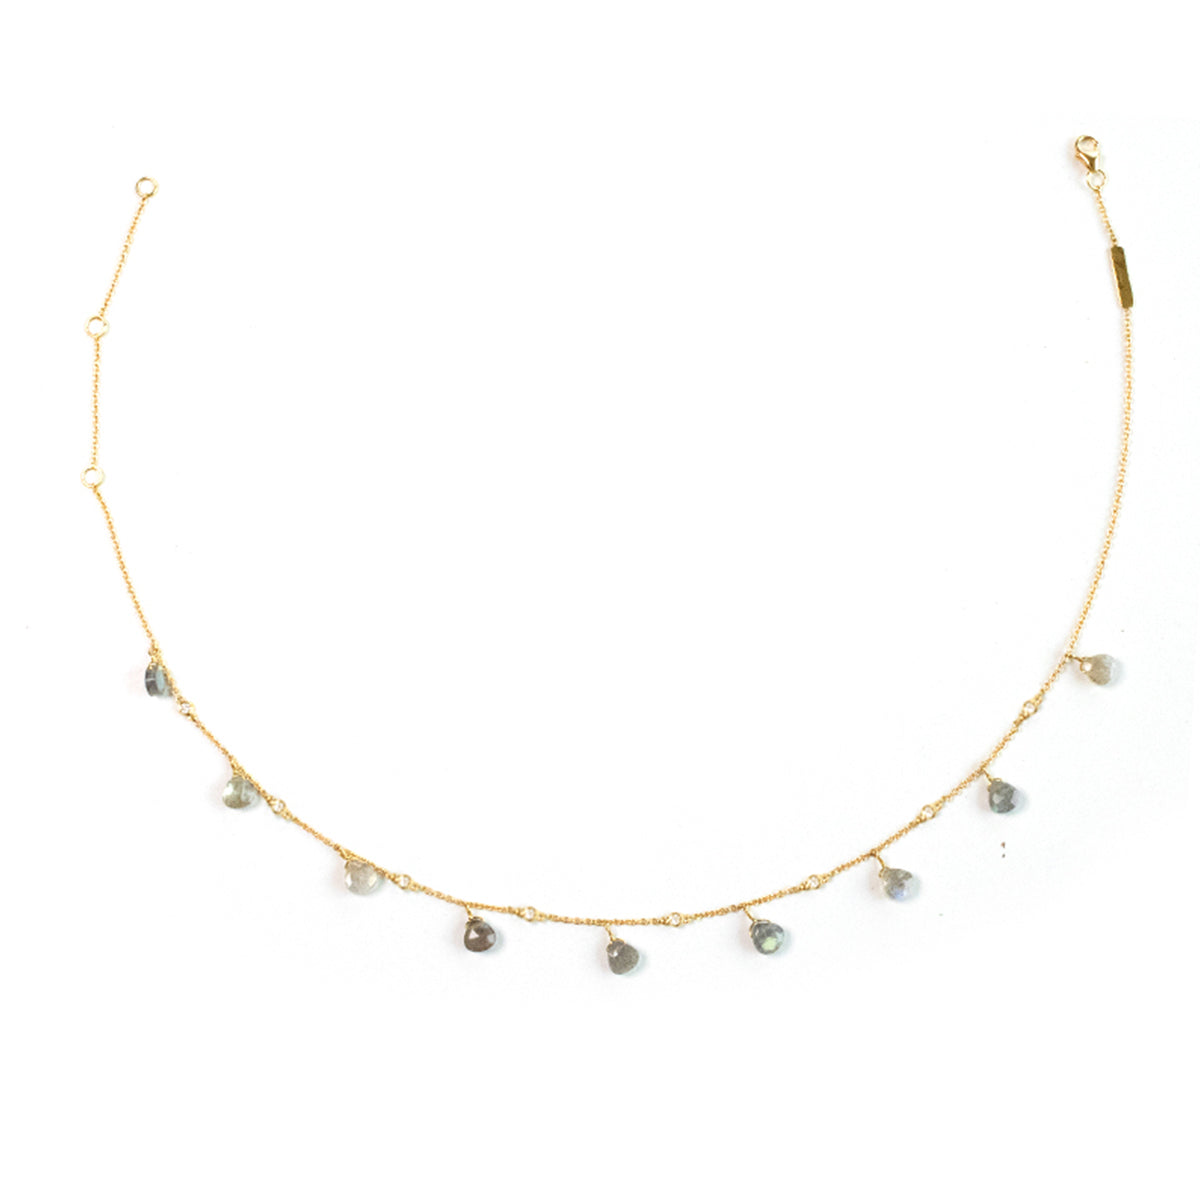 Multi Stones Necklace Gray Moonstone Pave In Diamonds Yellow Gold